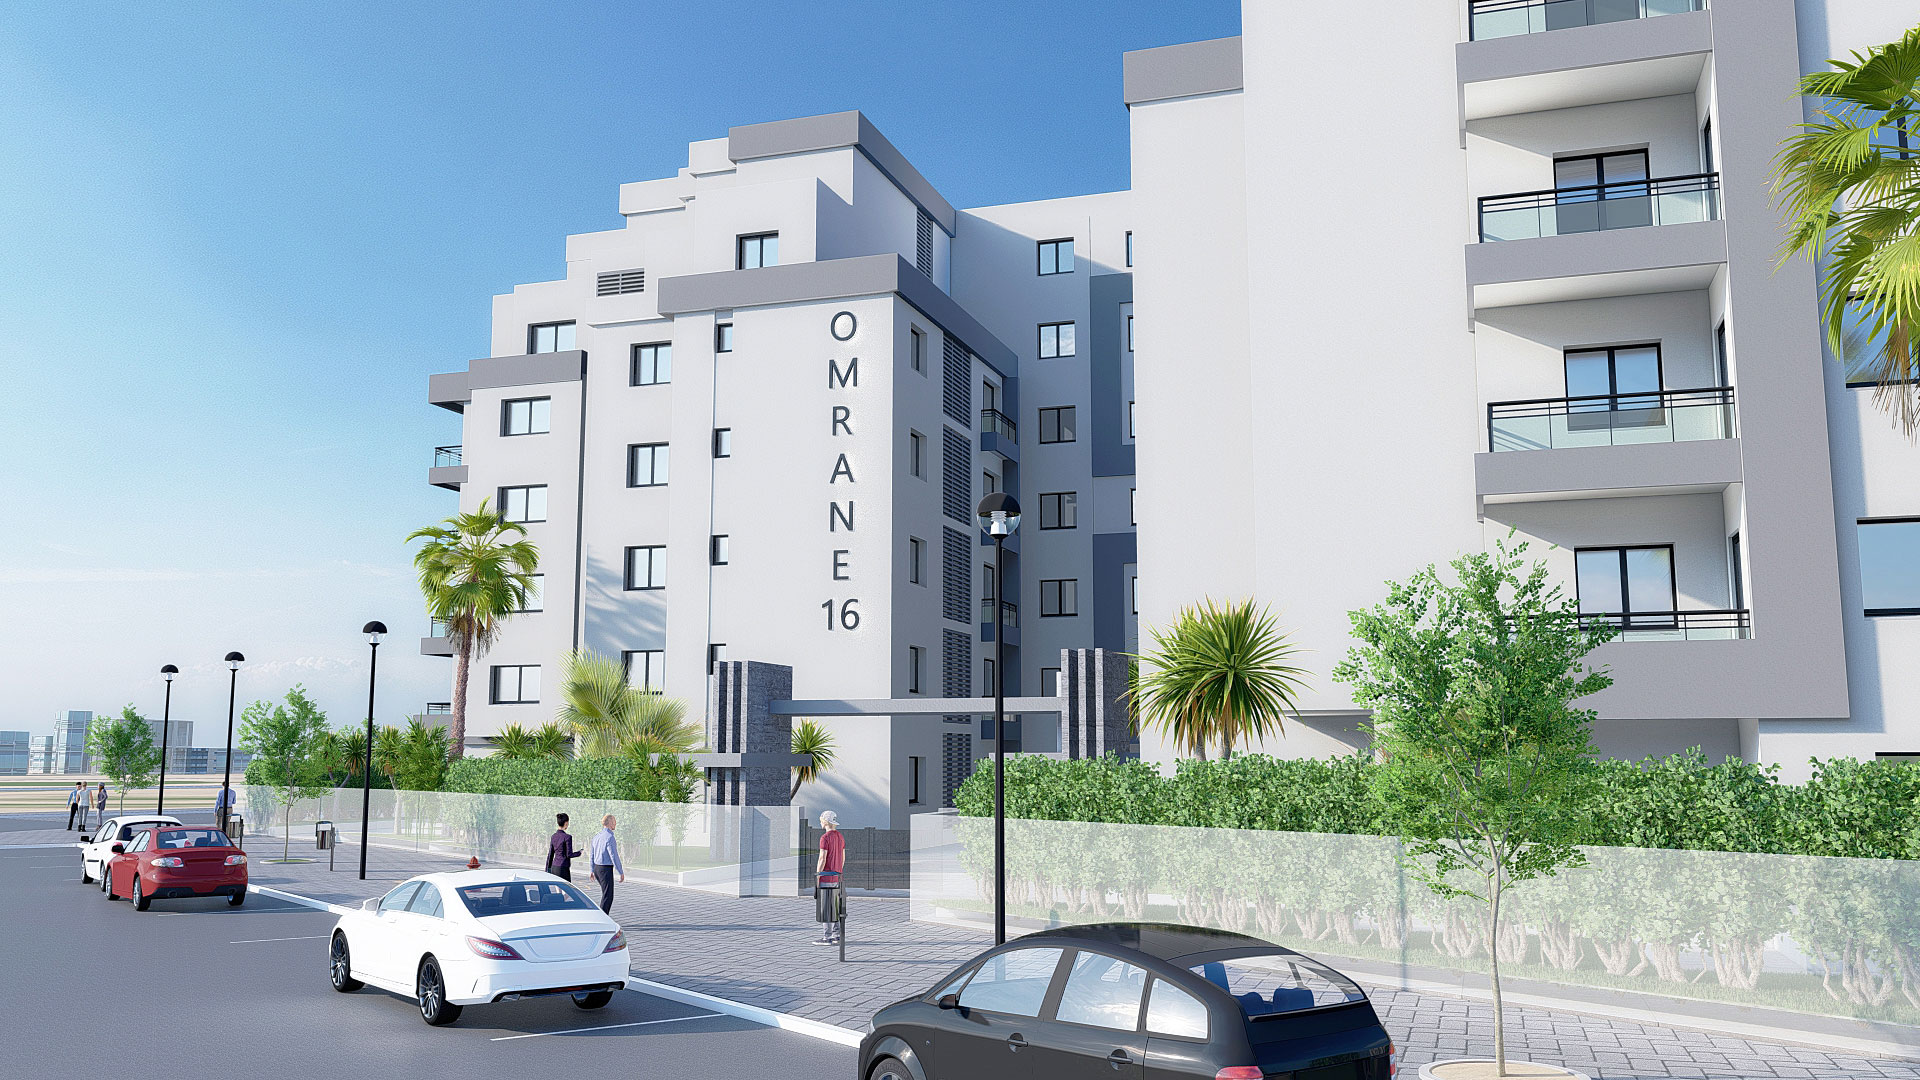 residence-omrane-16-immobiliere-du-maghreb-cite-el-ghazela-immobilier-appartement-tunisie-1-6